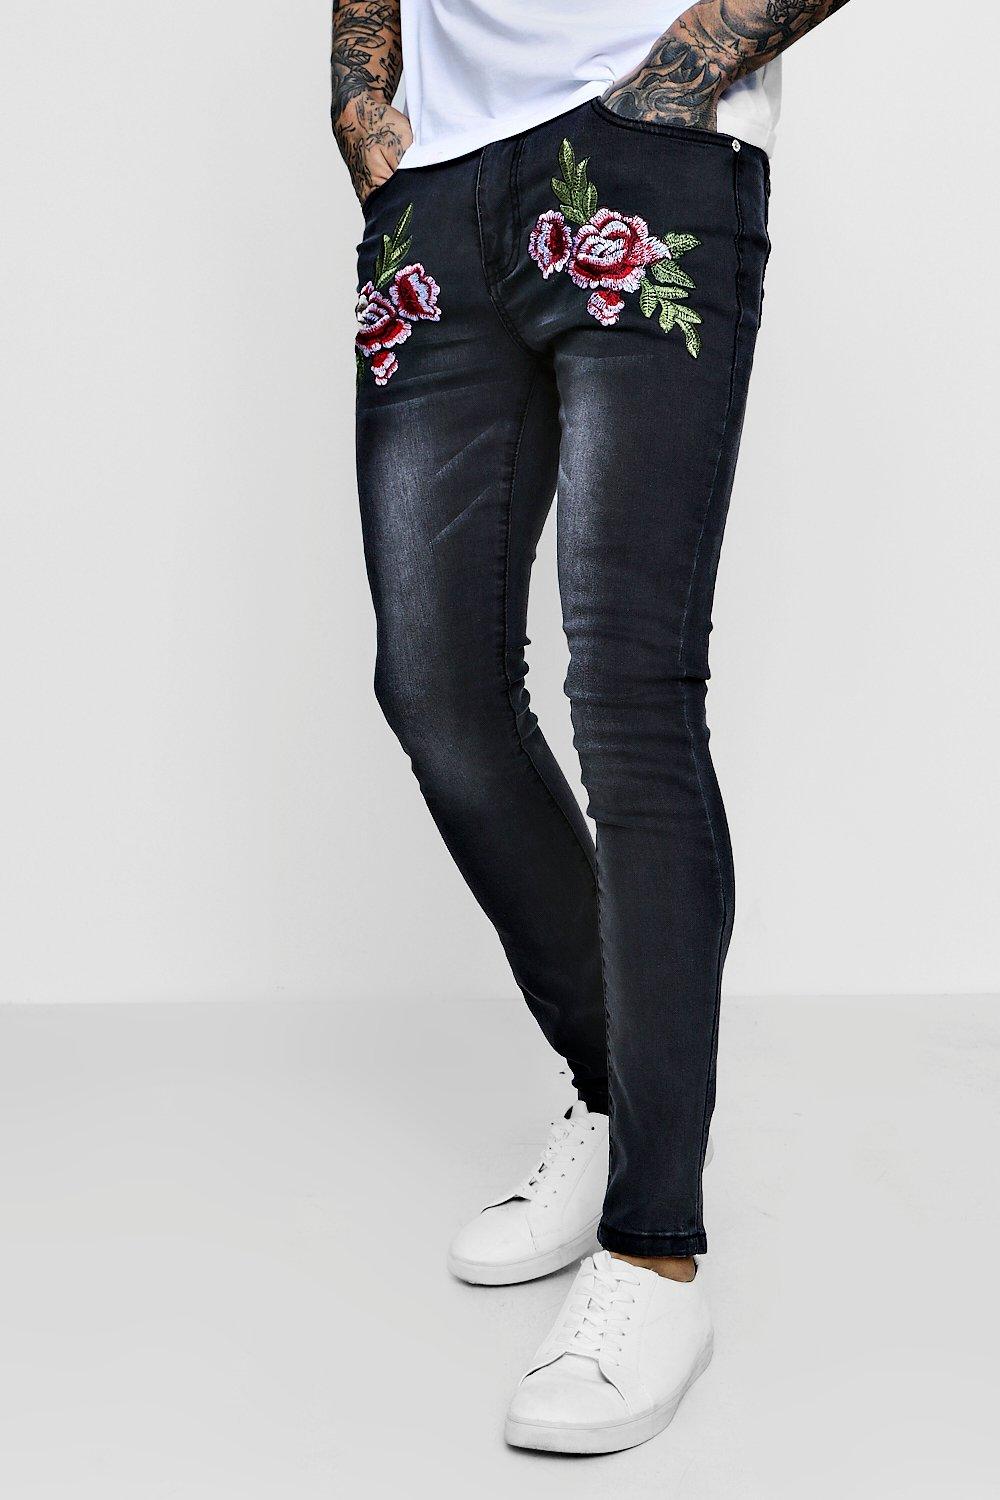 mens skinny jeans with roses